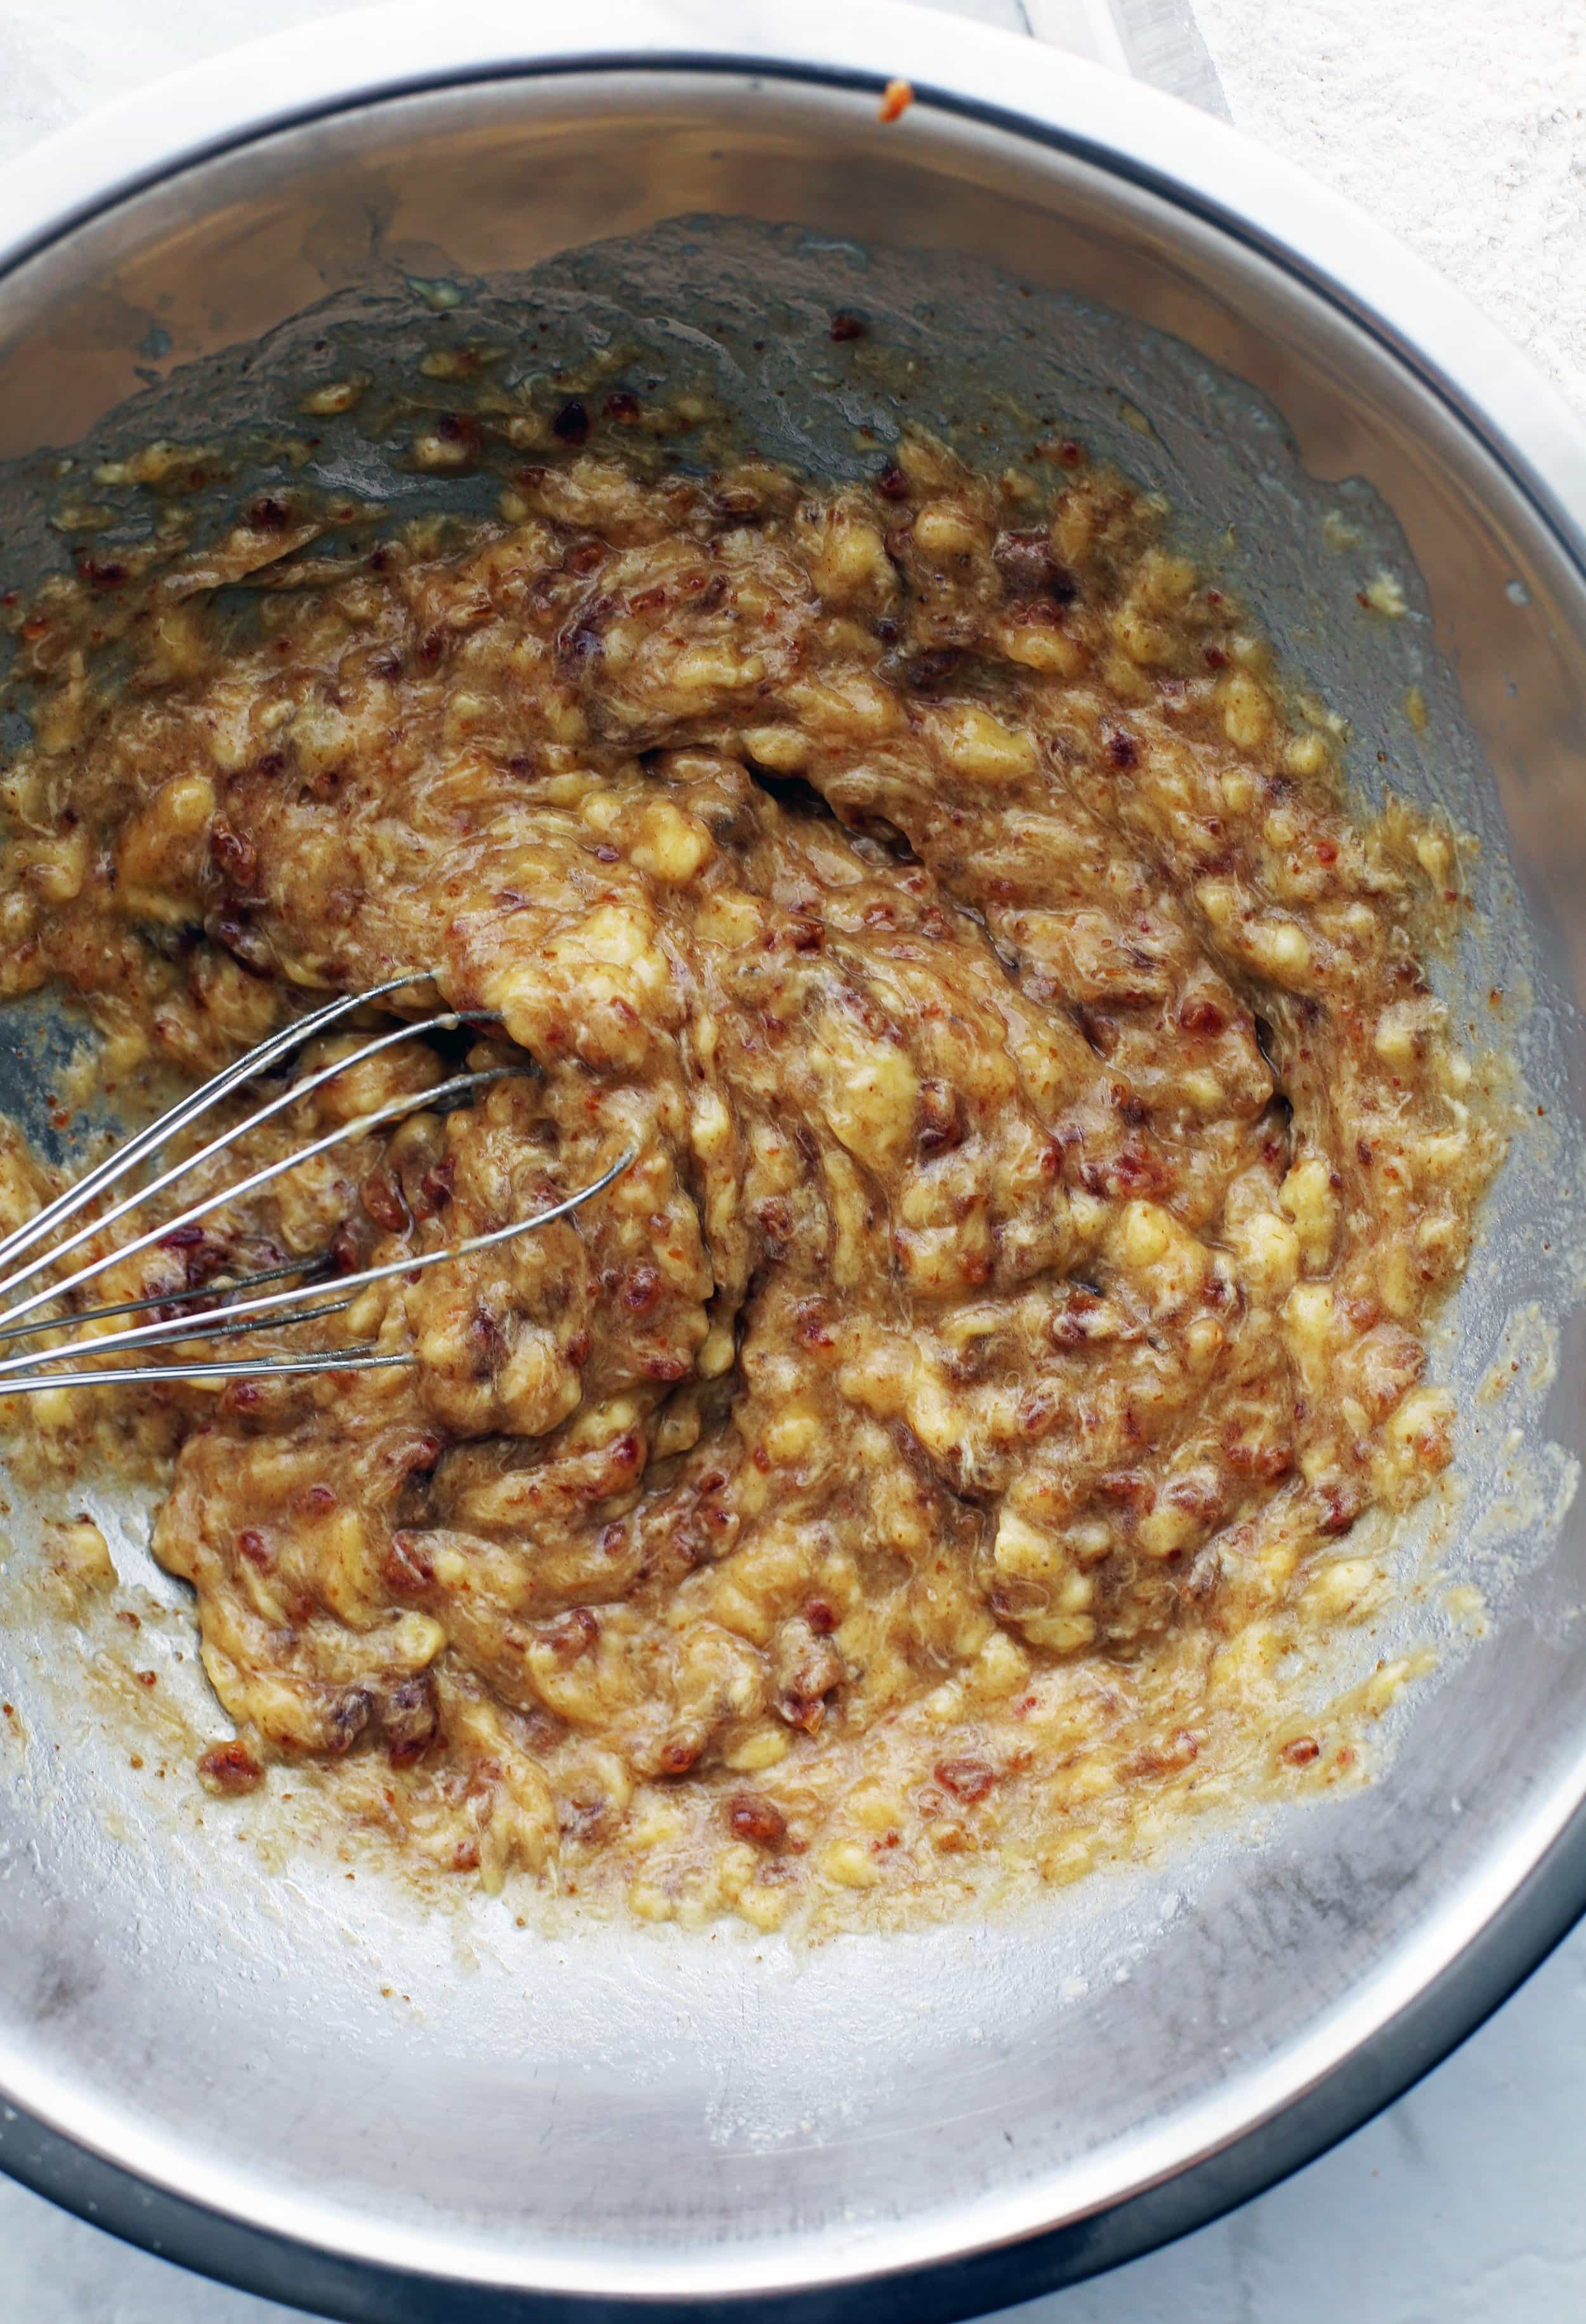 Medjool date paste, mashed bananas, and hot water mixed together using a wire whisk in a metal bowl.